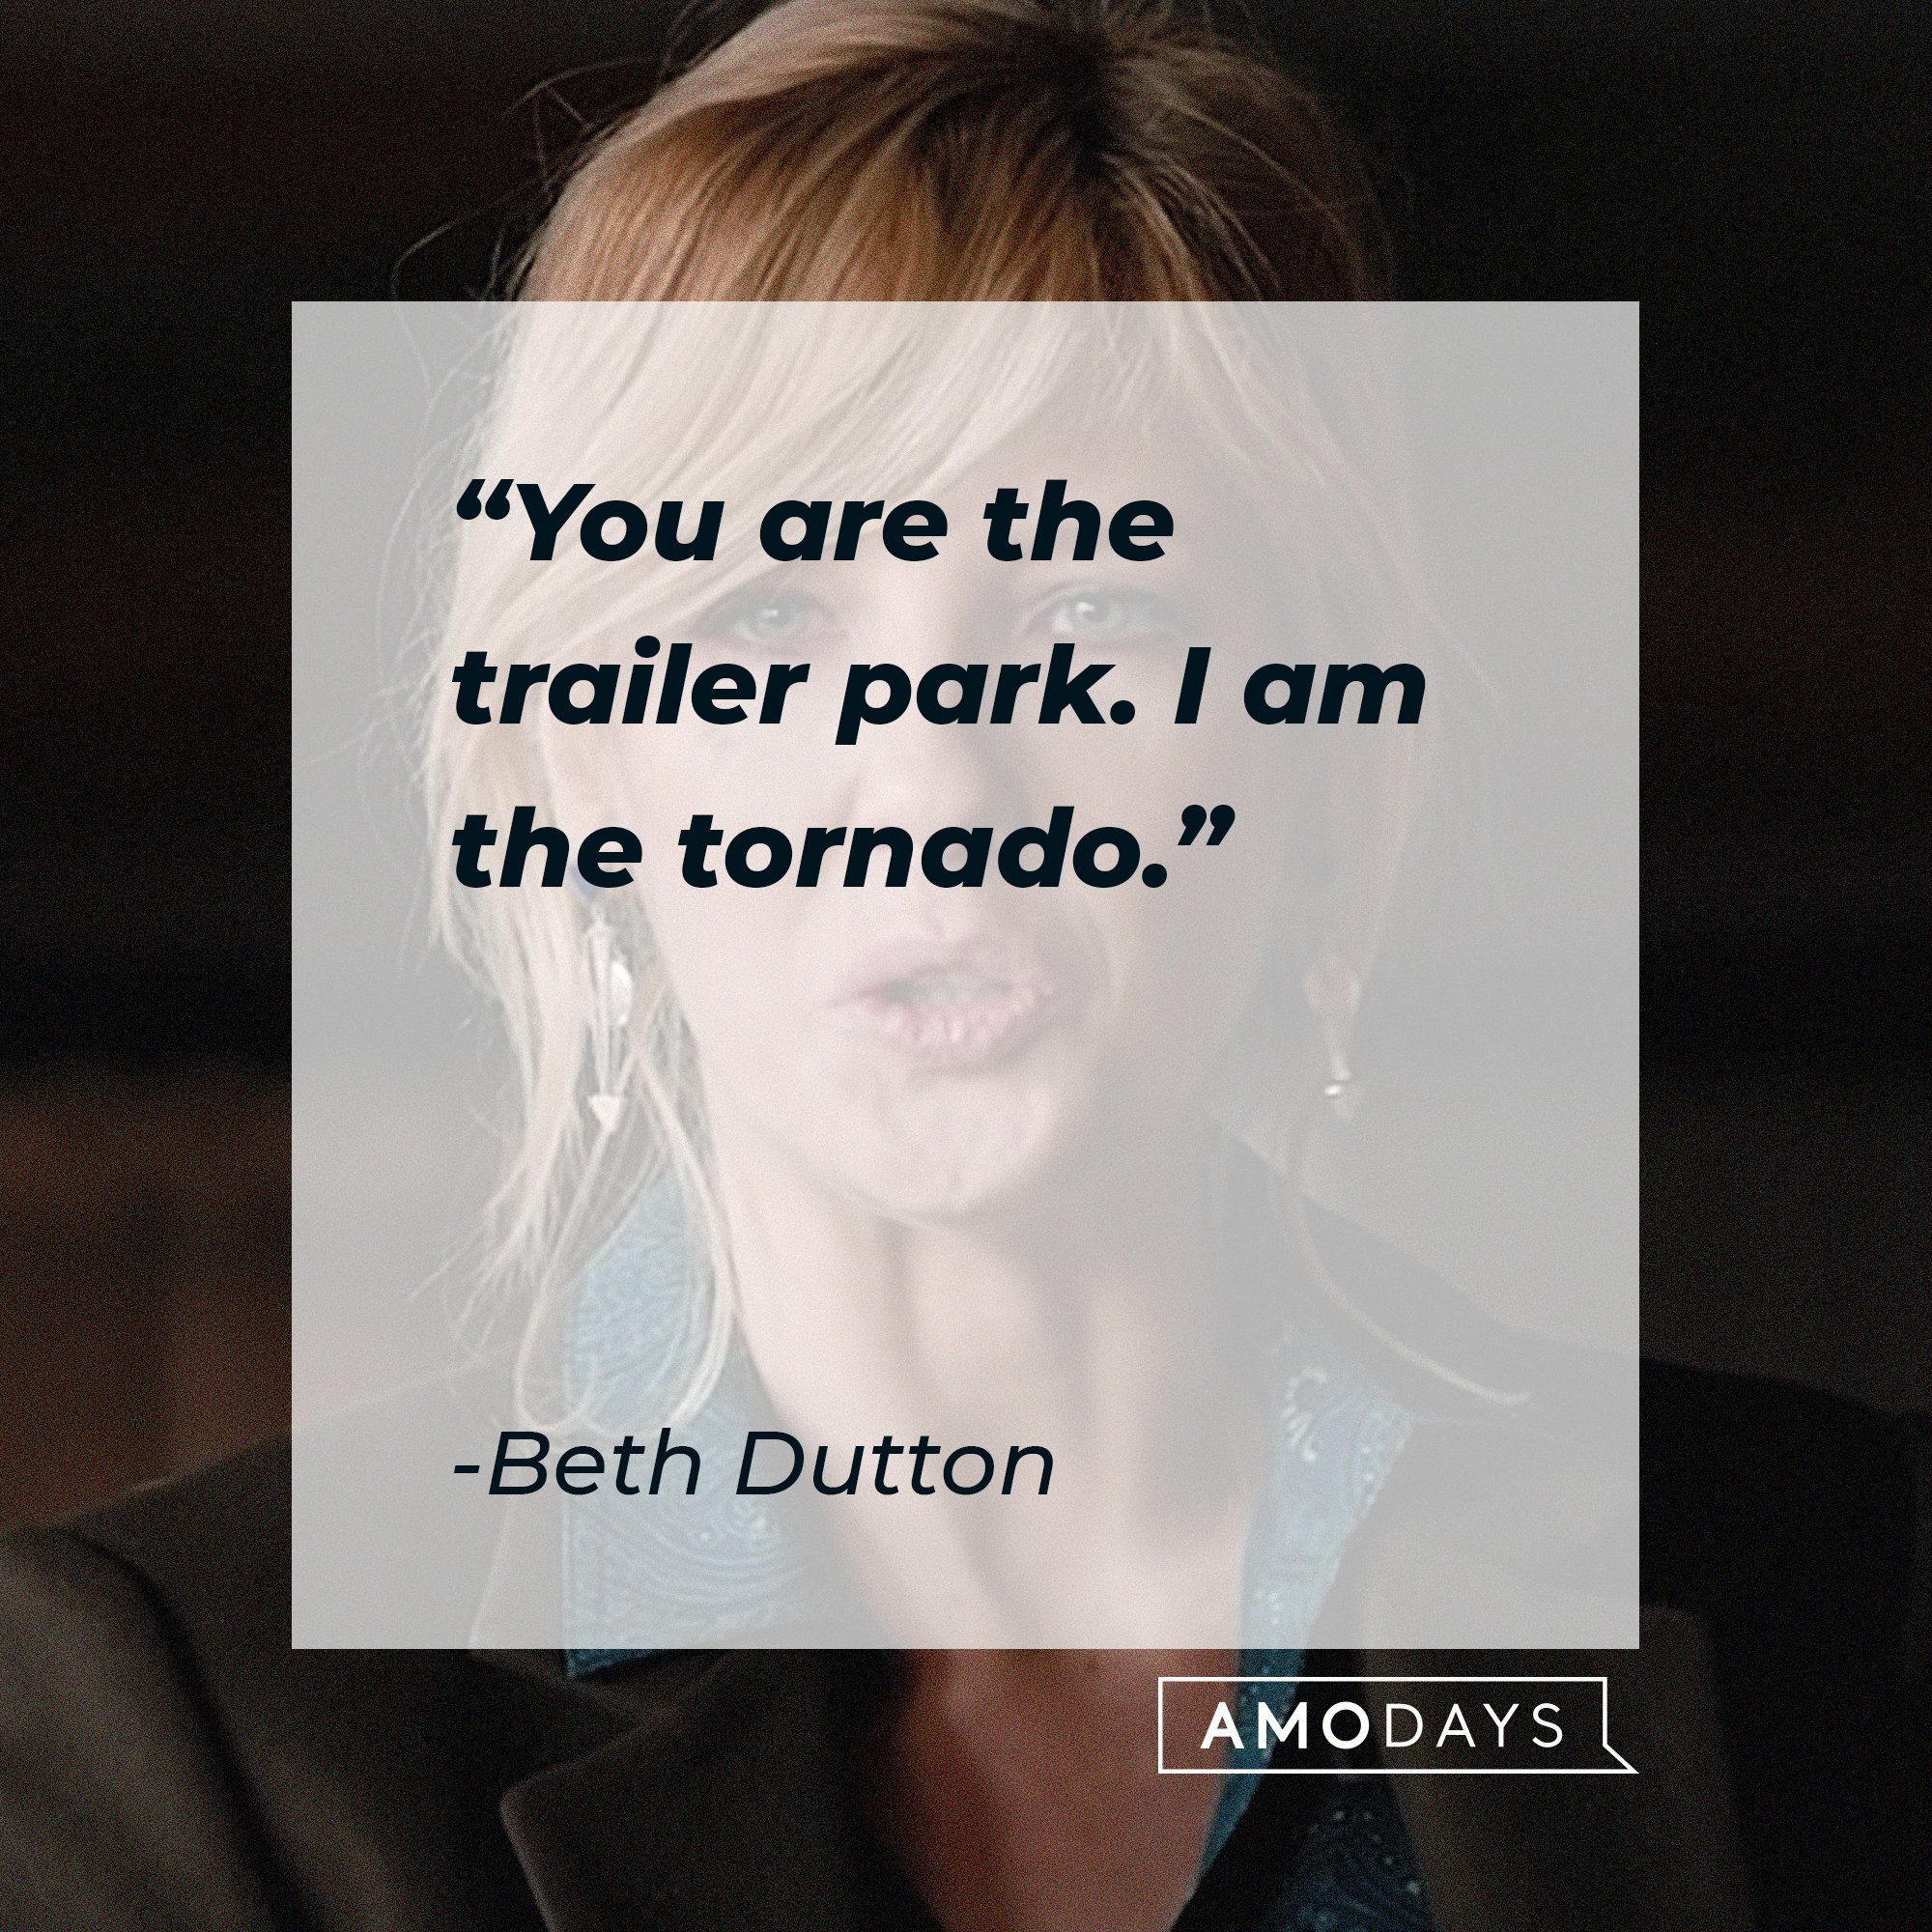  Beth Dutton's quote: "You are the trailer park. I am the tornado." | Source: AmoDays